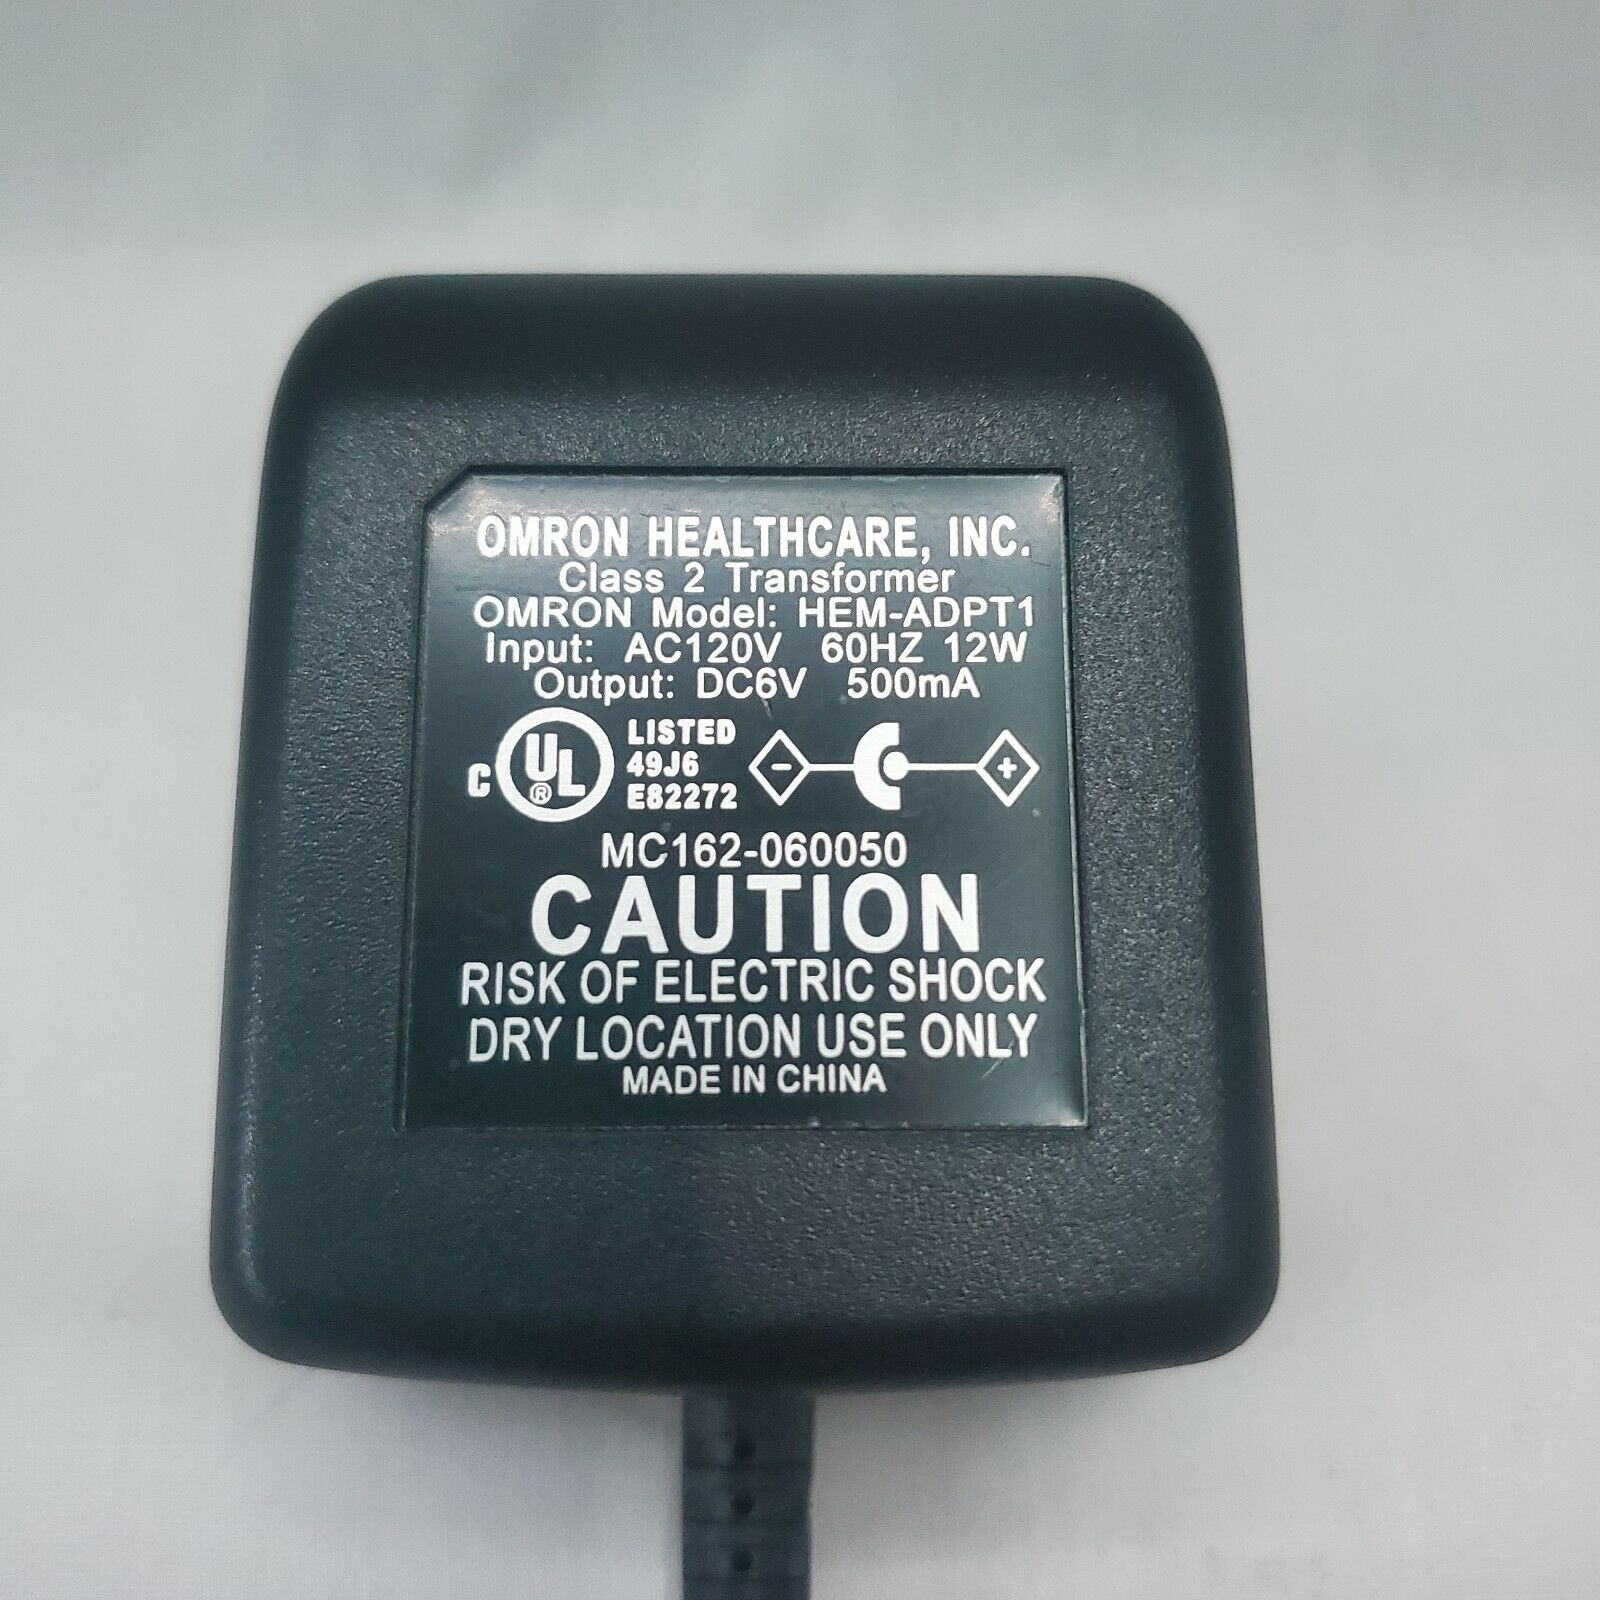 omron healthcare inc mc162-060050 6v 500ma ac to dc adaptor Type: AC/DC Adapter Output Voltage: 6 V Brand: omron